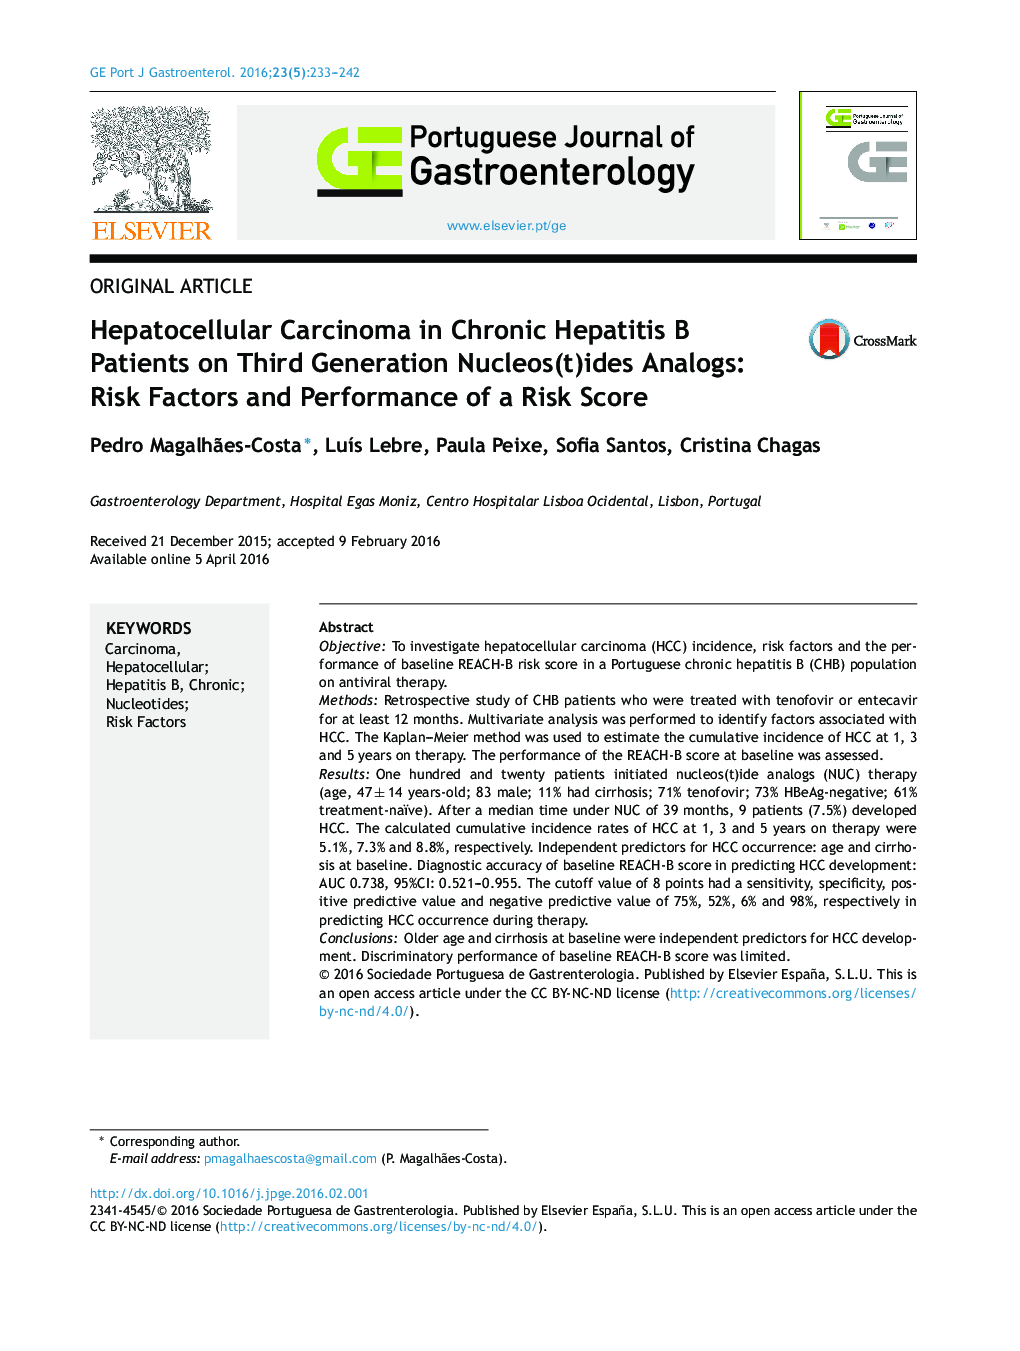 Hepatocellular Carcinoma in Chronic Hepatitis B Patients on Third Generation Nucleos(t)ides Analogs: Risk Factors and Performance of a Risk Score